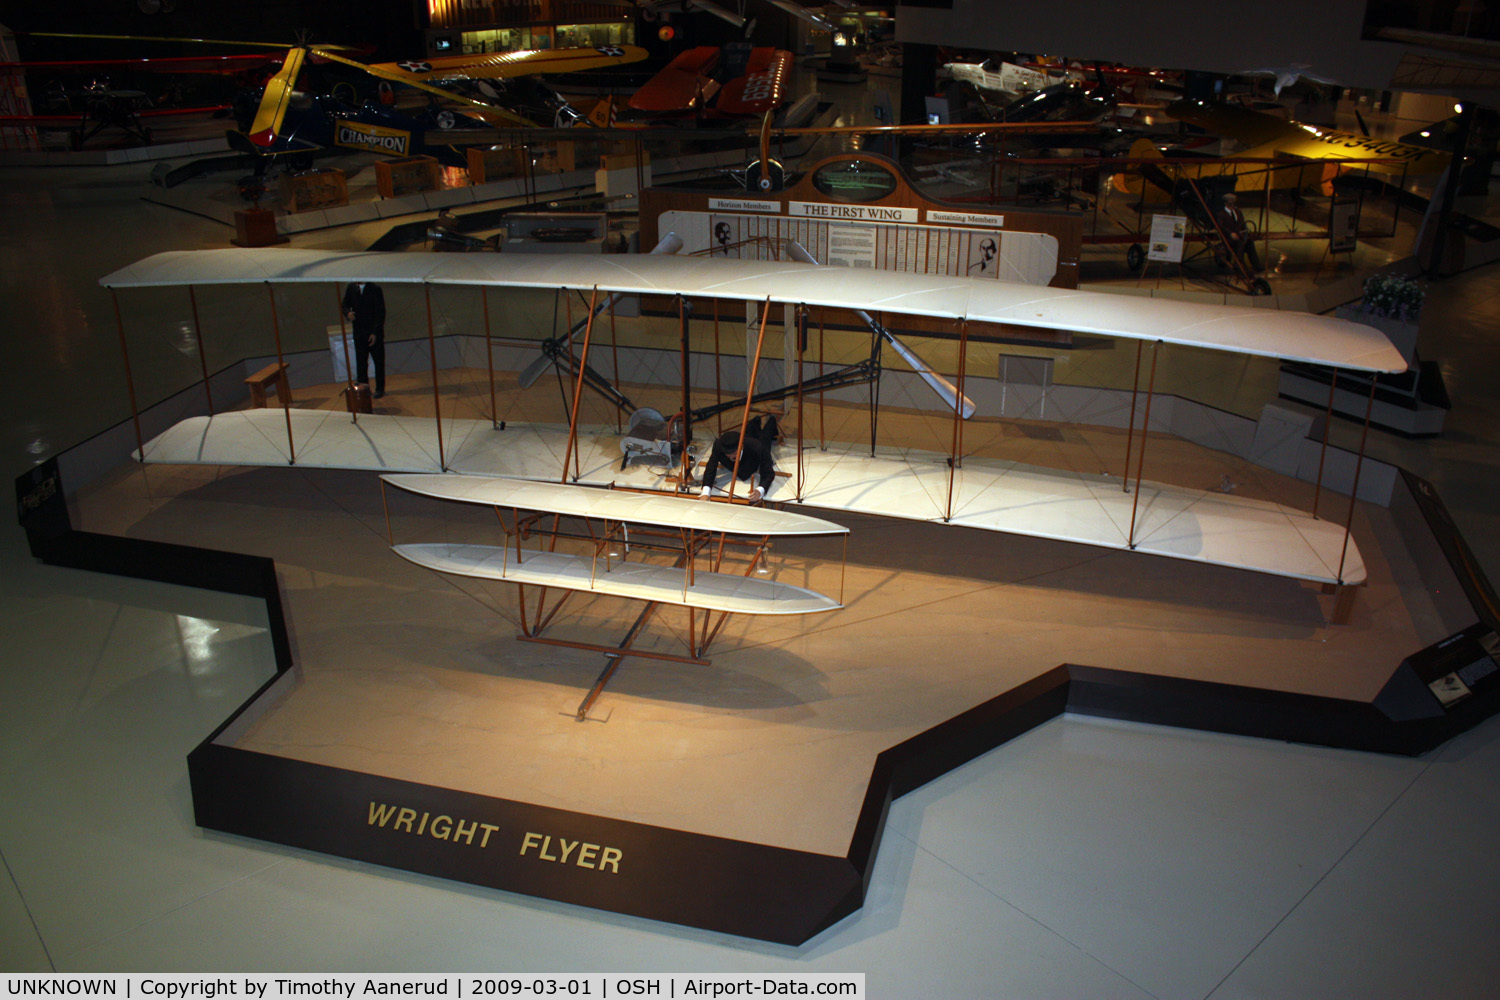 UNKNOWN, Wright Flyer 1 Replica C/N unknown, EAA AirVenture Museum